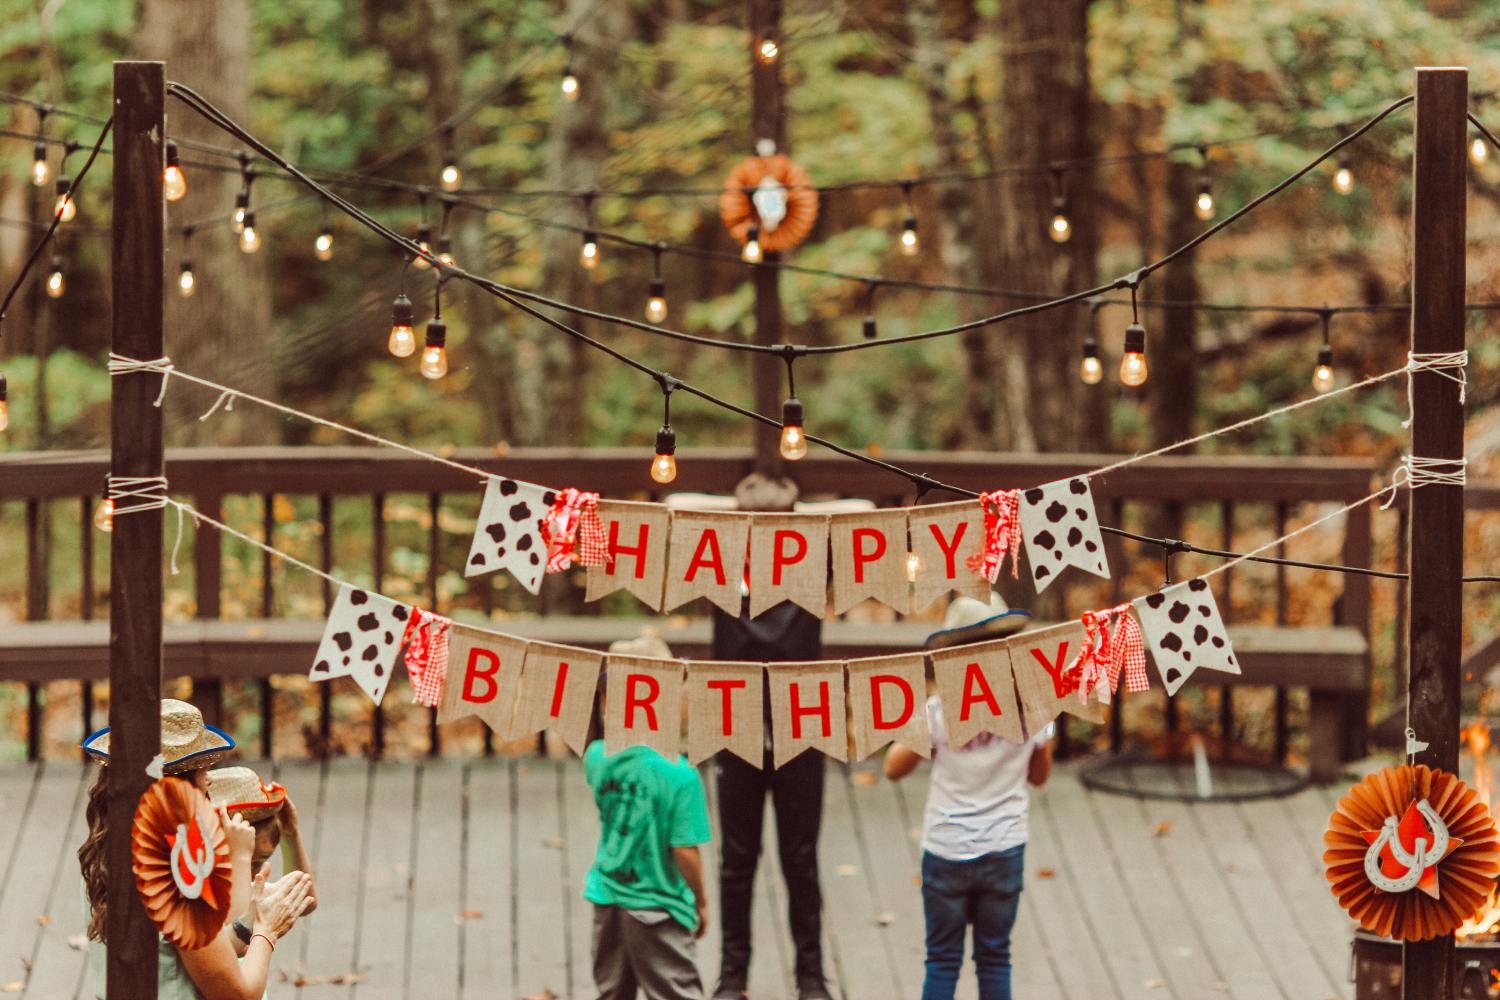 Happy birthday sign made from fabric hanging outdoors